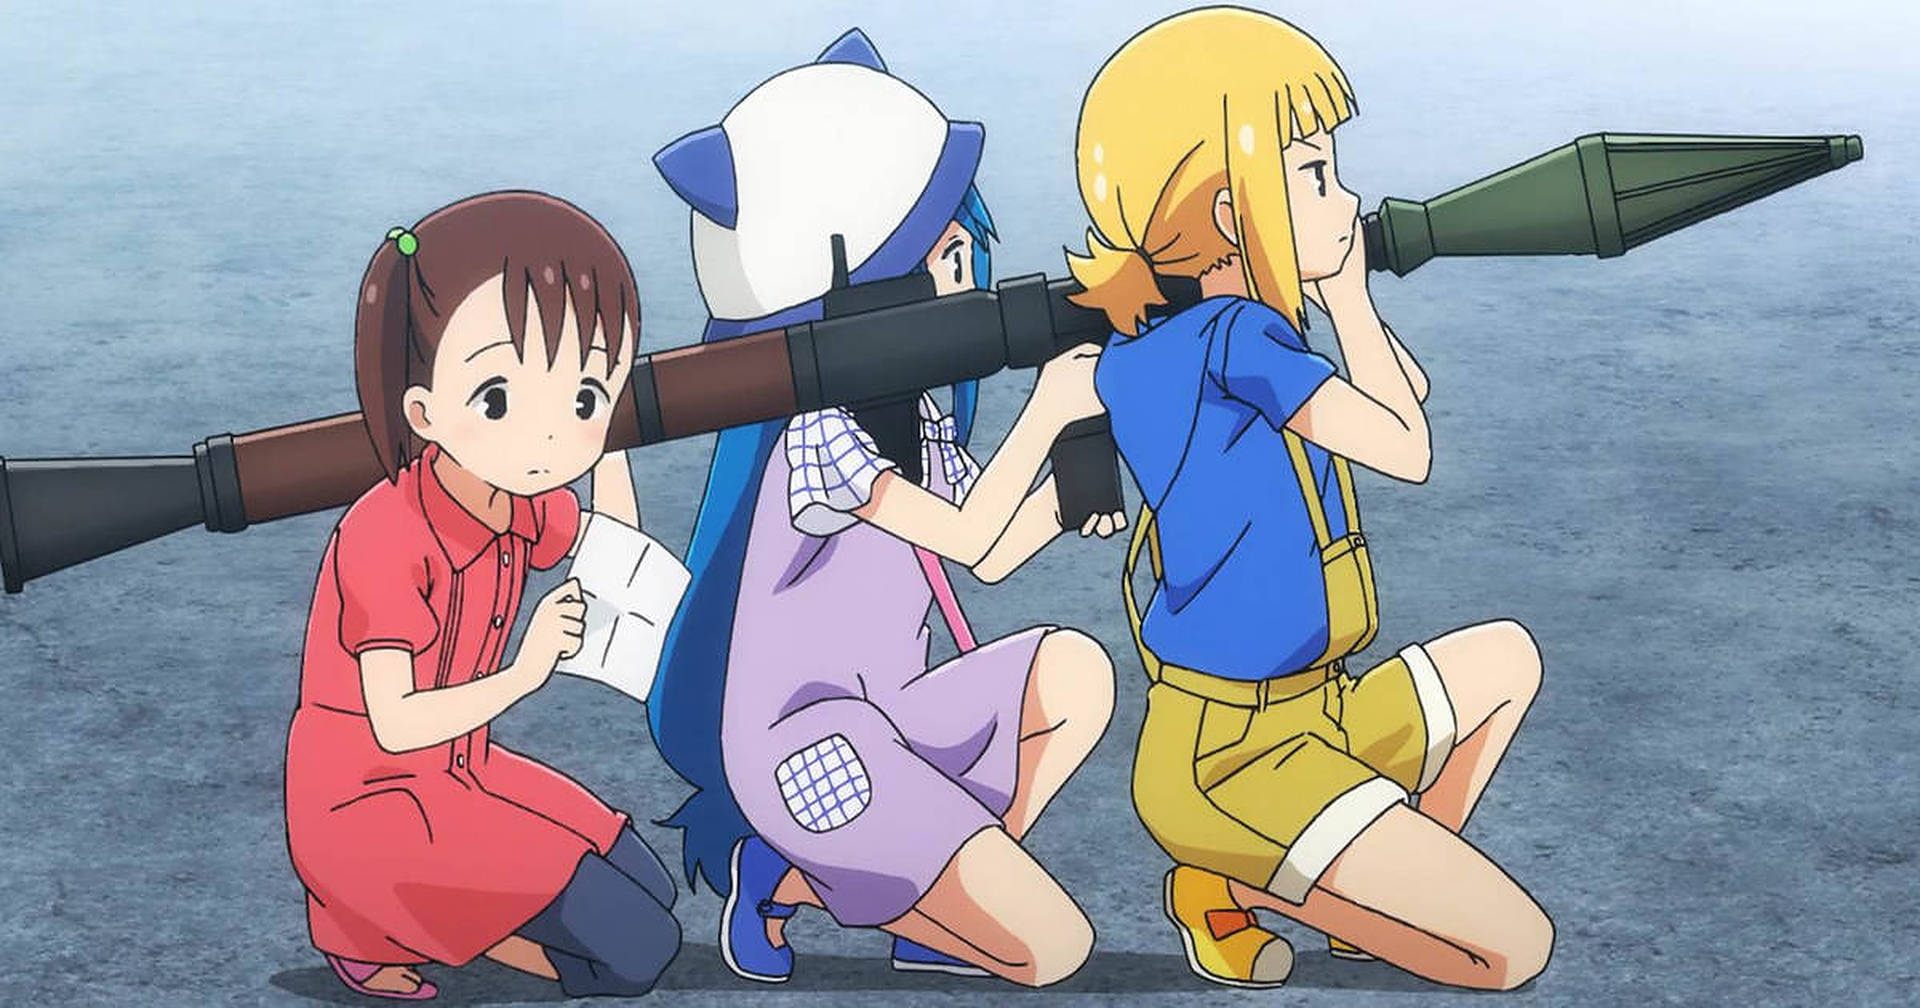 Anime Kids With Rocket Launcher Wallpaper